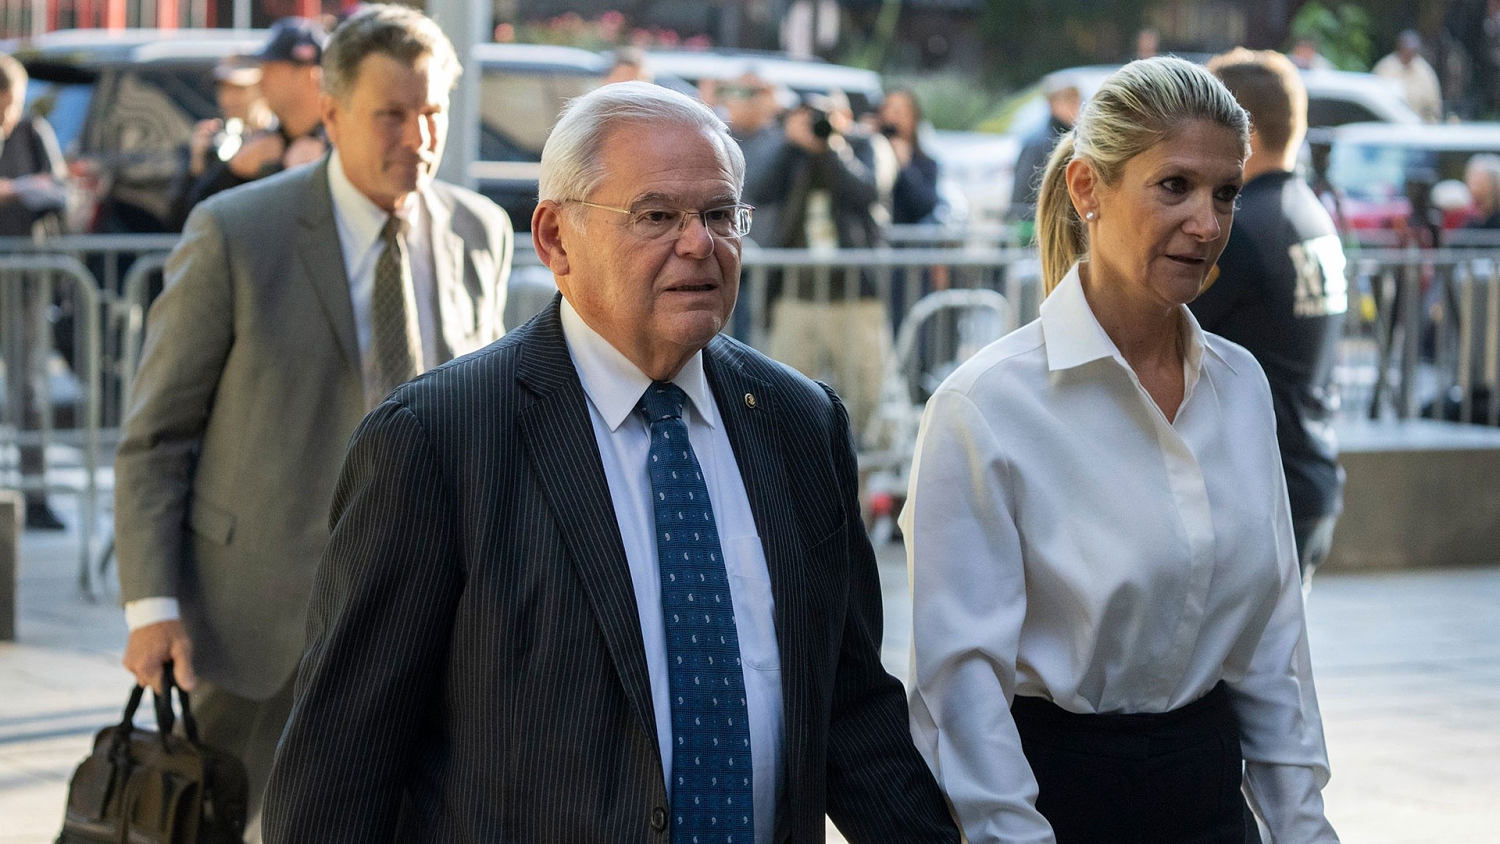 Sen. Menendez may blame his wife for his alleged crimes